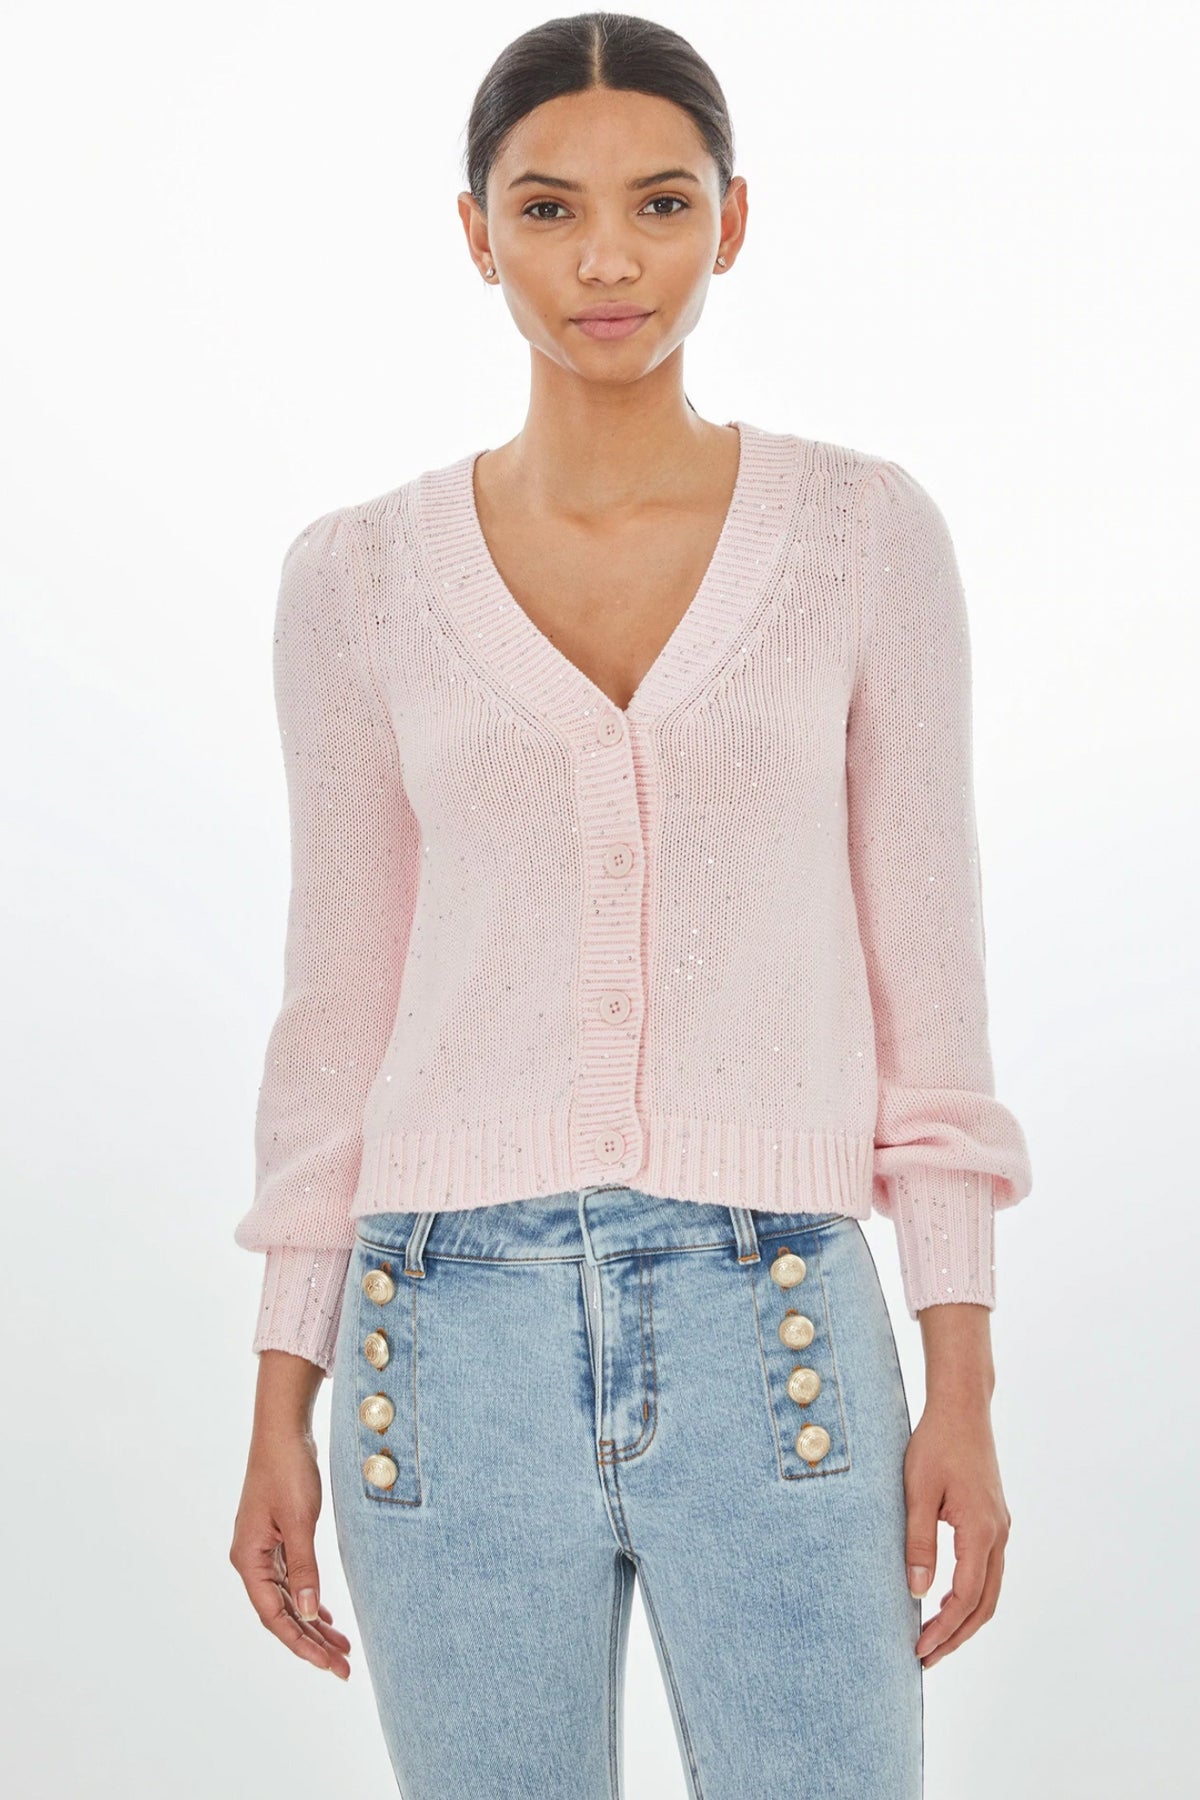 Generation Love Lowell Sequin Knitted Cardigan